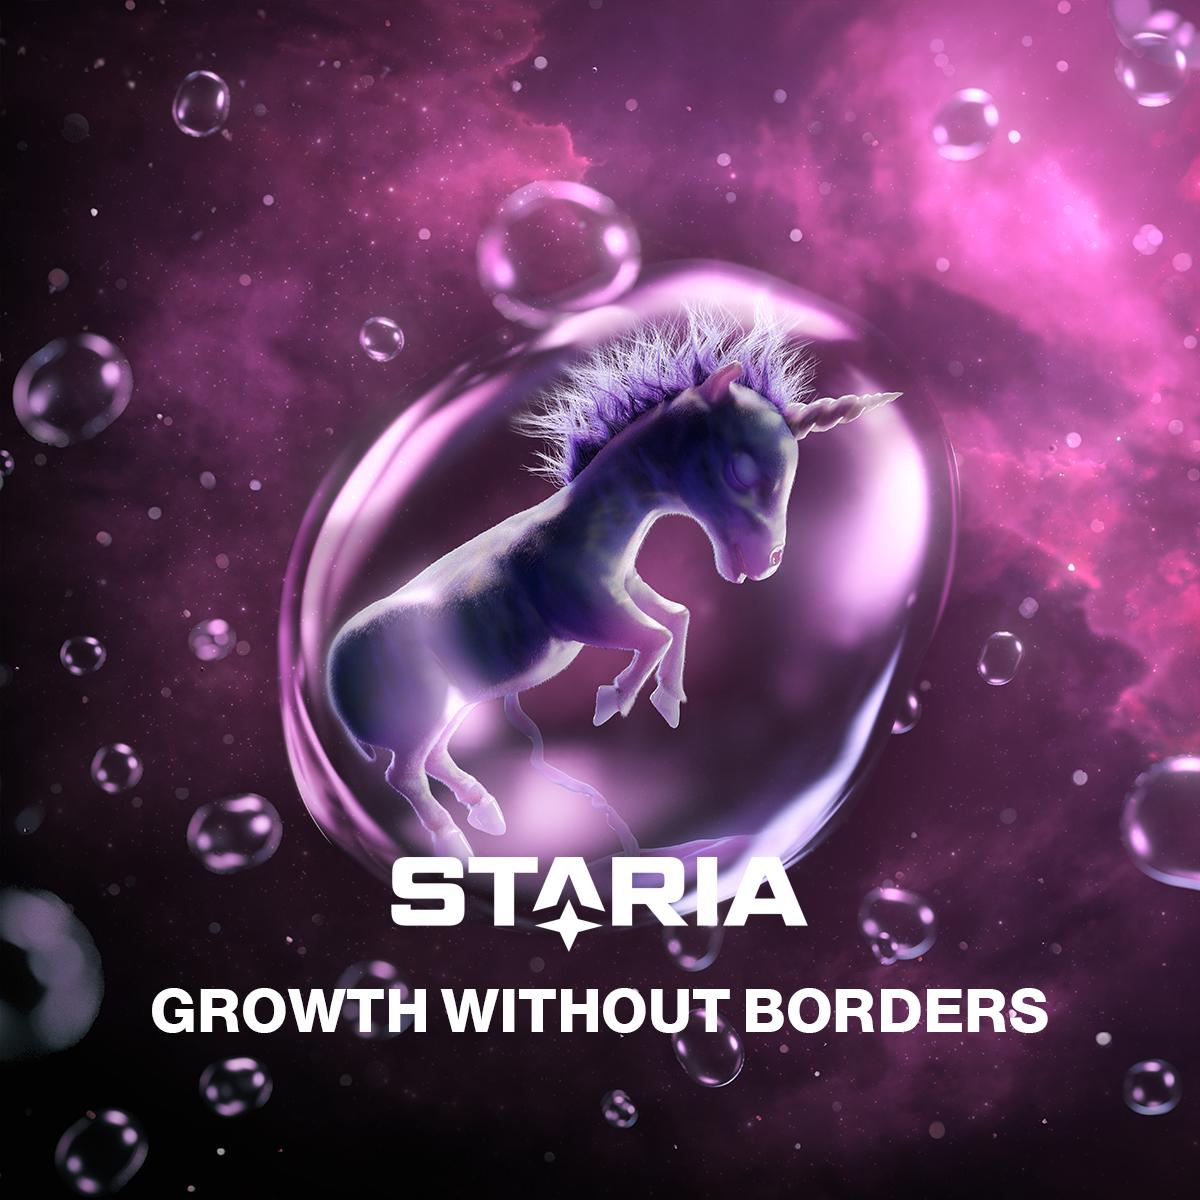 Staria Unicorn - Growth without Borders